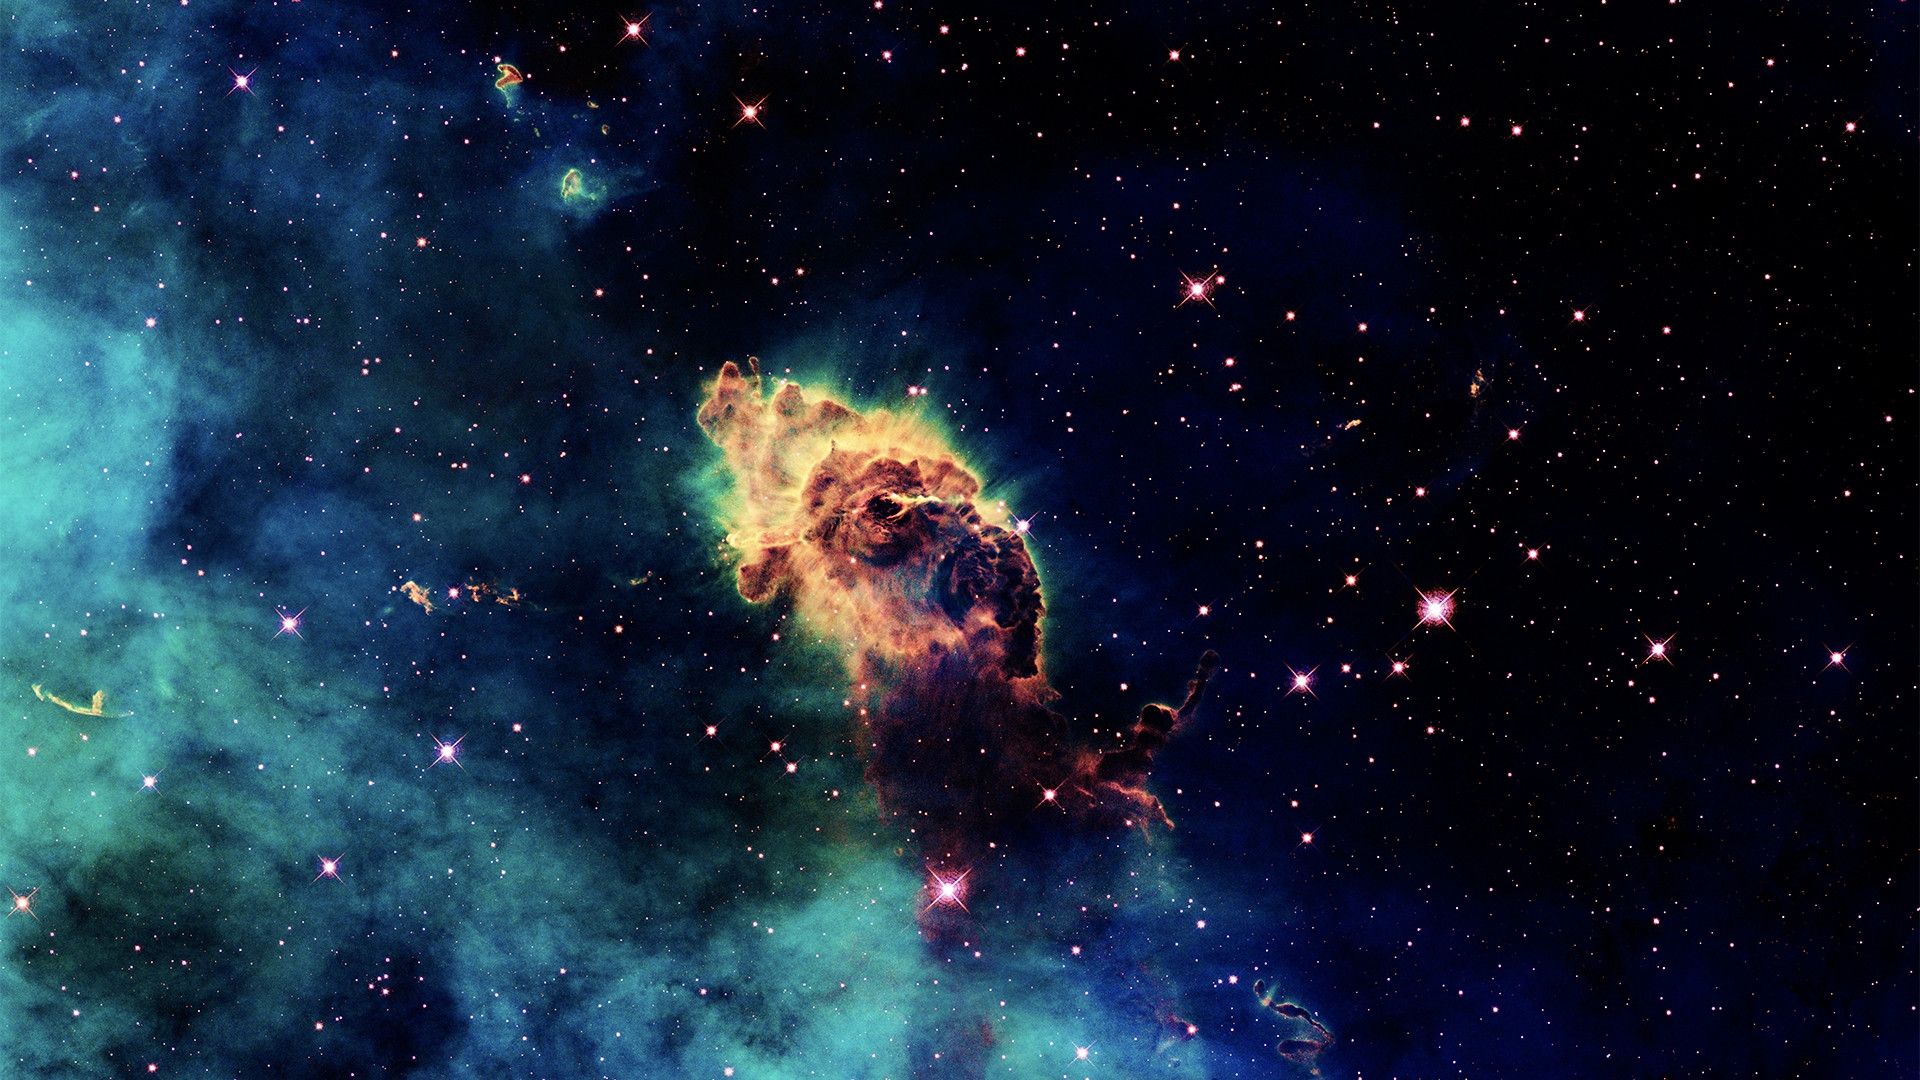 Download Real Space Wallpaper Phone zl3b hdxwallpaperz.com